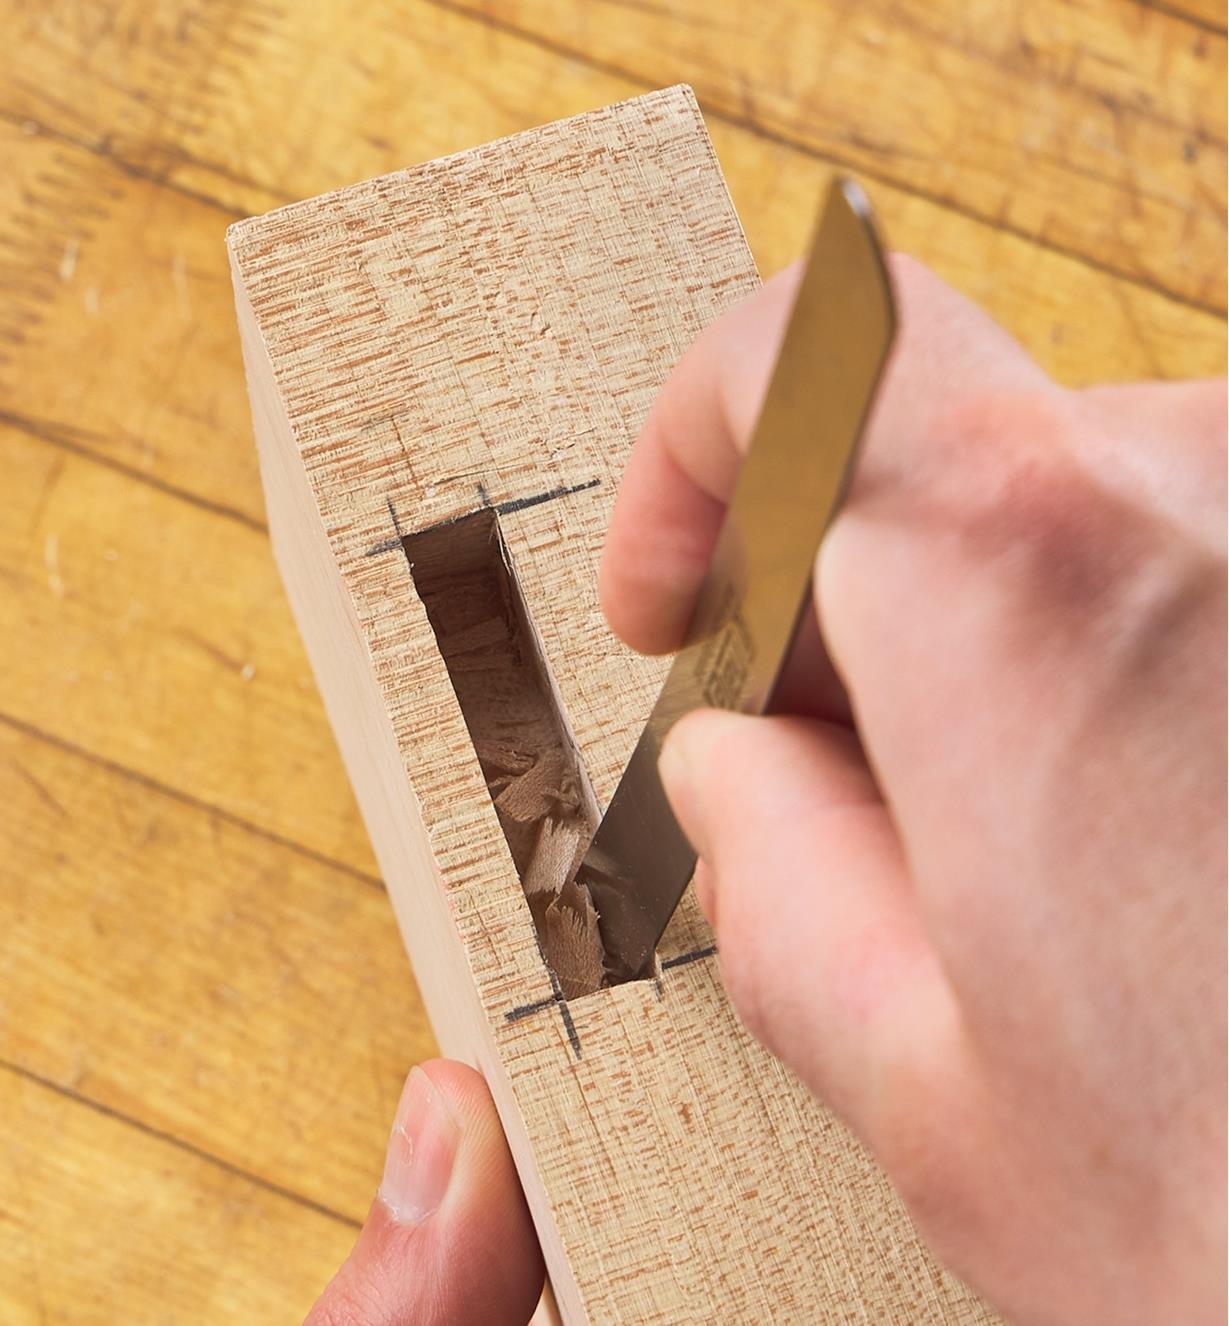 Scraping the walls of a right-angled mortise using the Narex uni-scraper